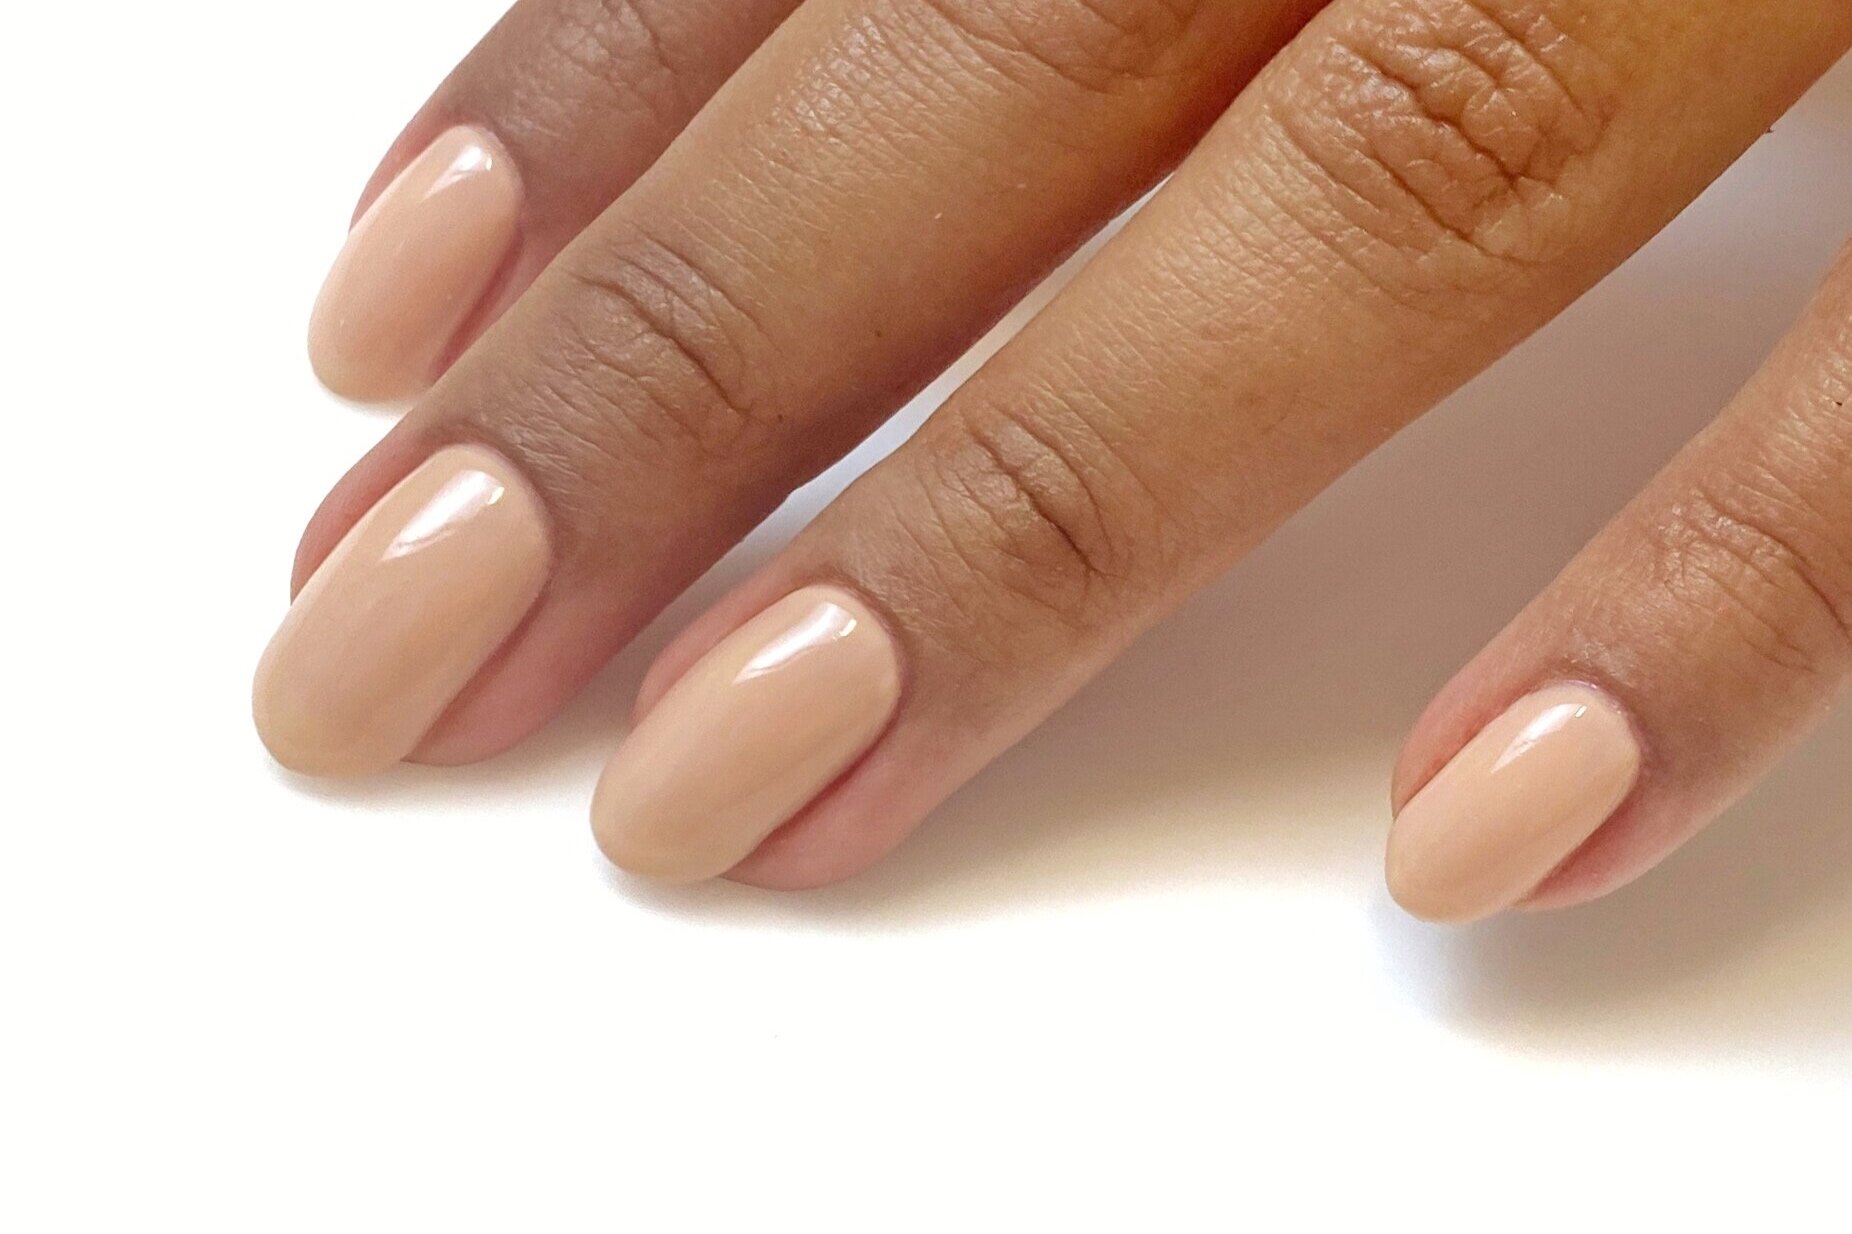 How Much Does It Cost to Get Your Nails Done - Nail Salon Cost?